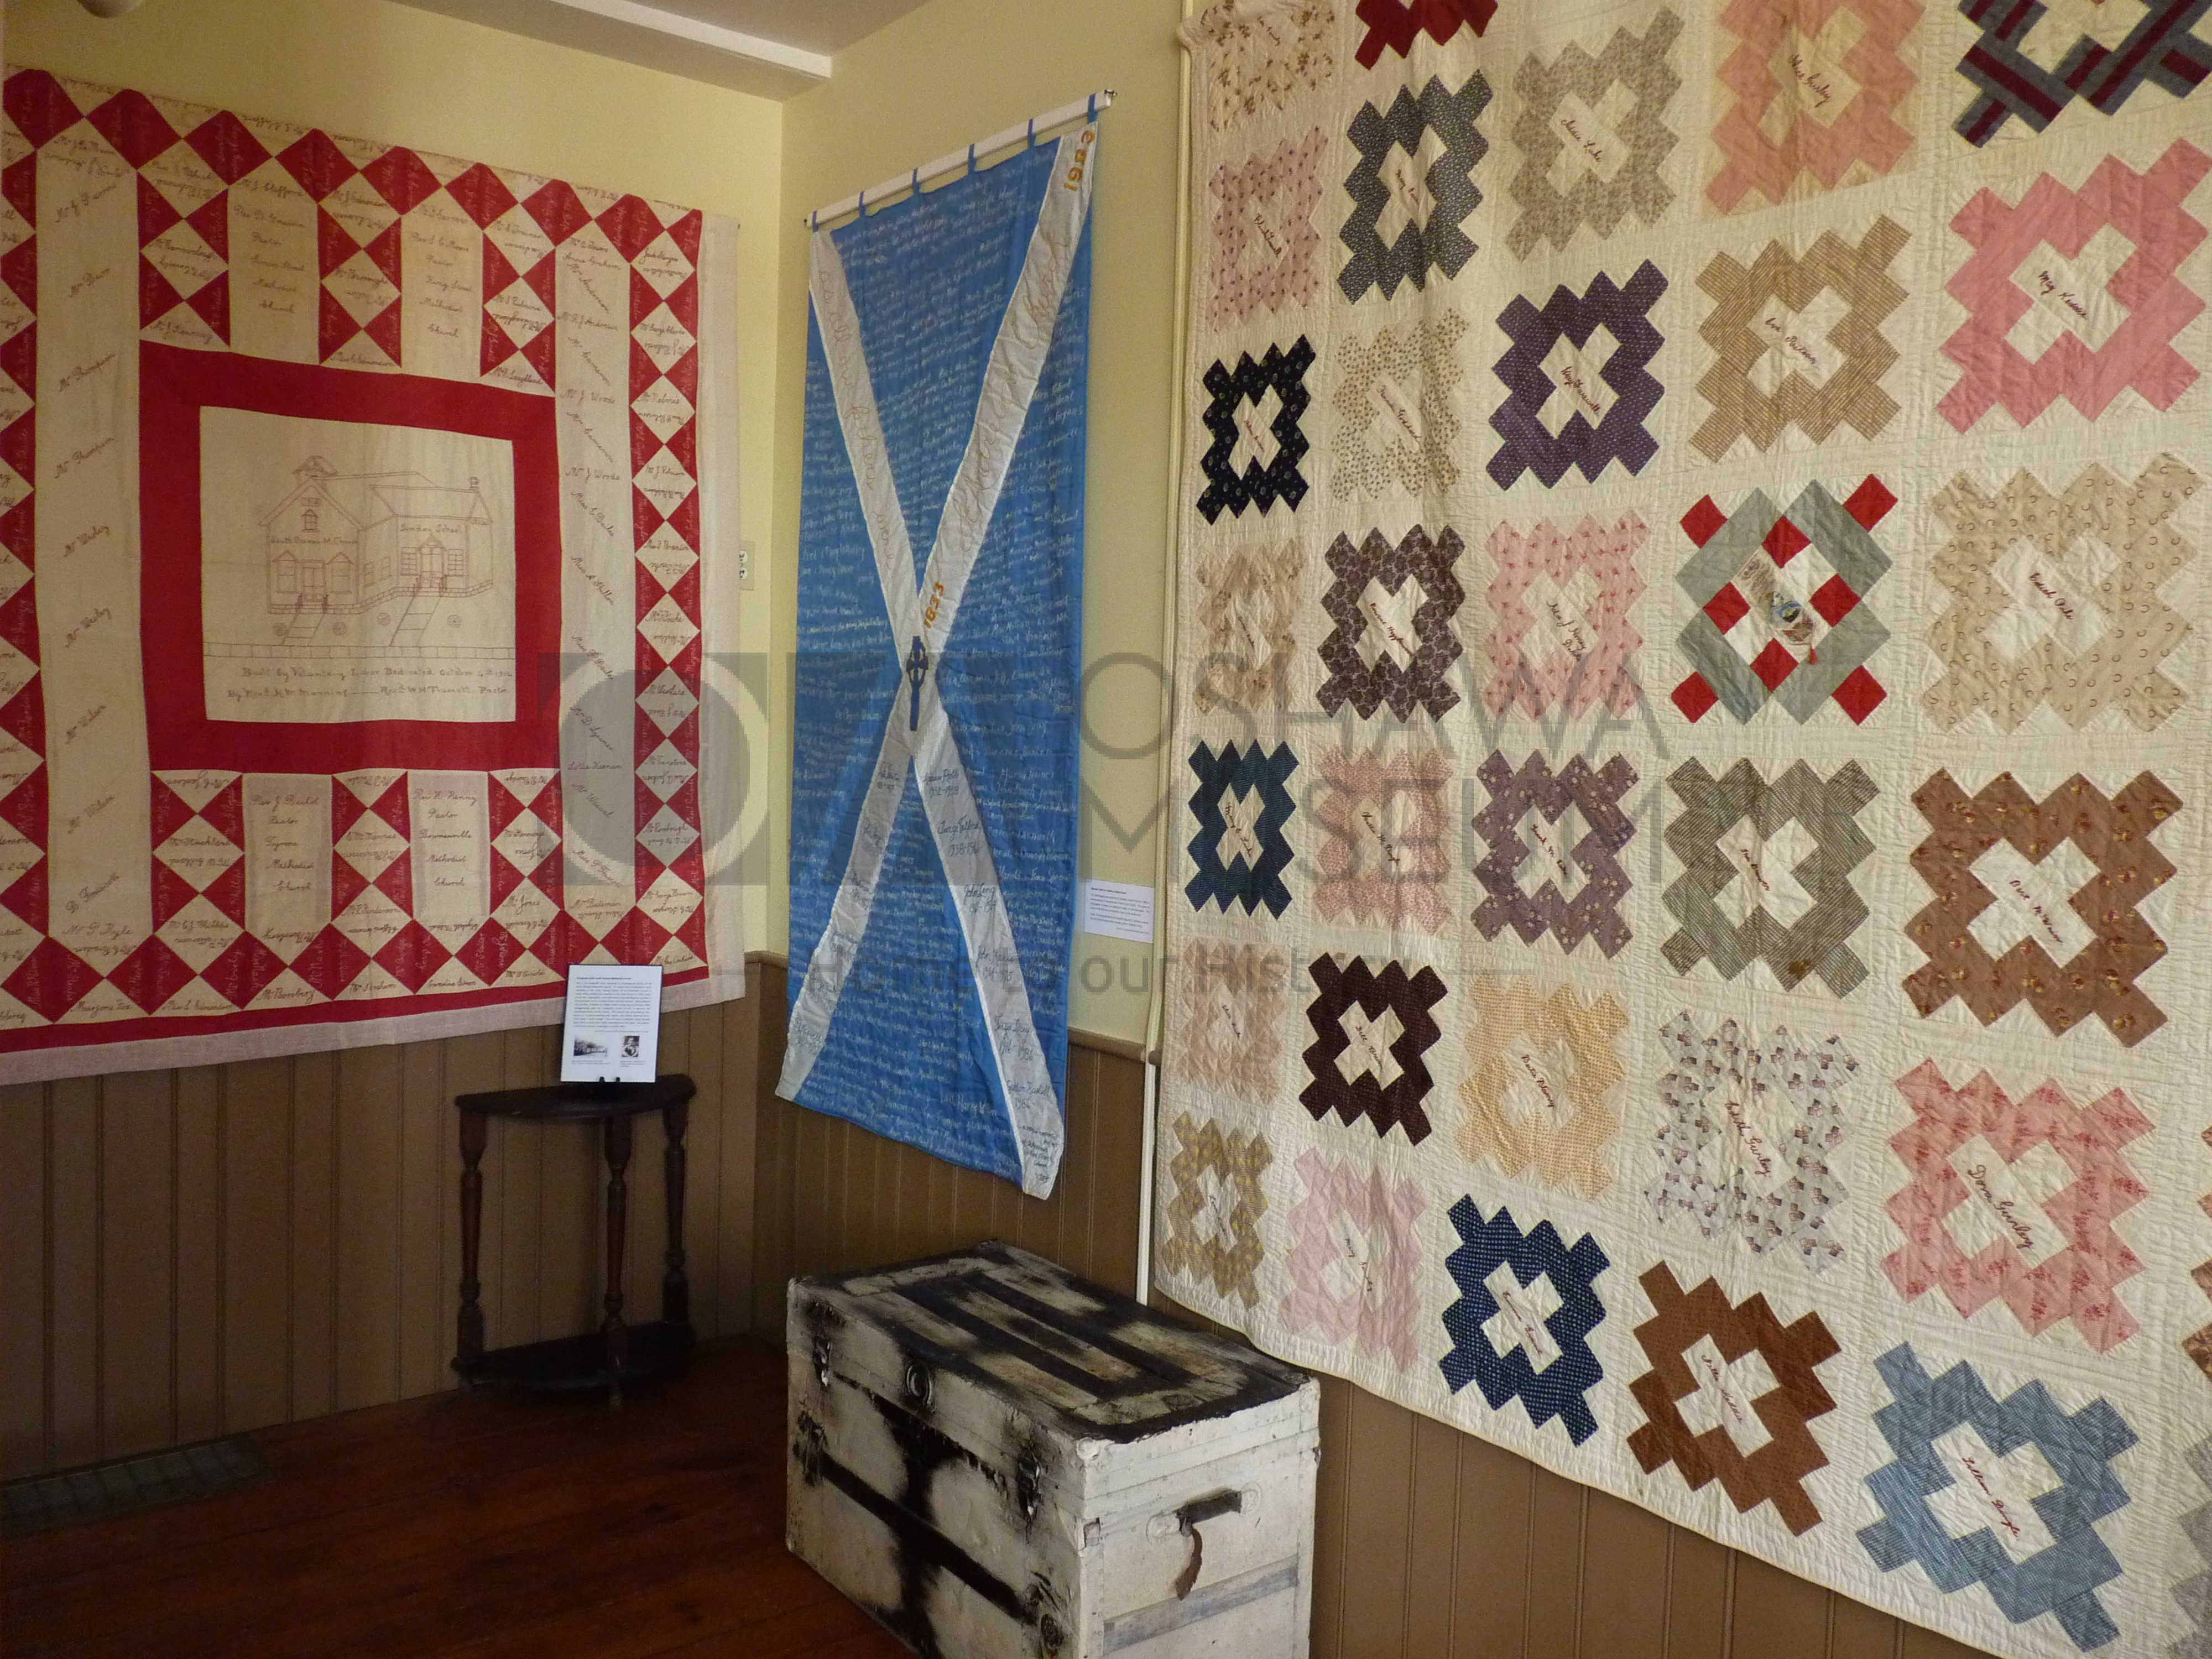 A room with colourful quilts handing on the walls